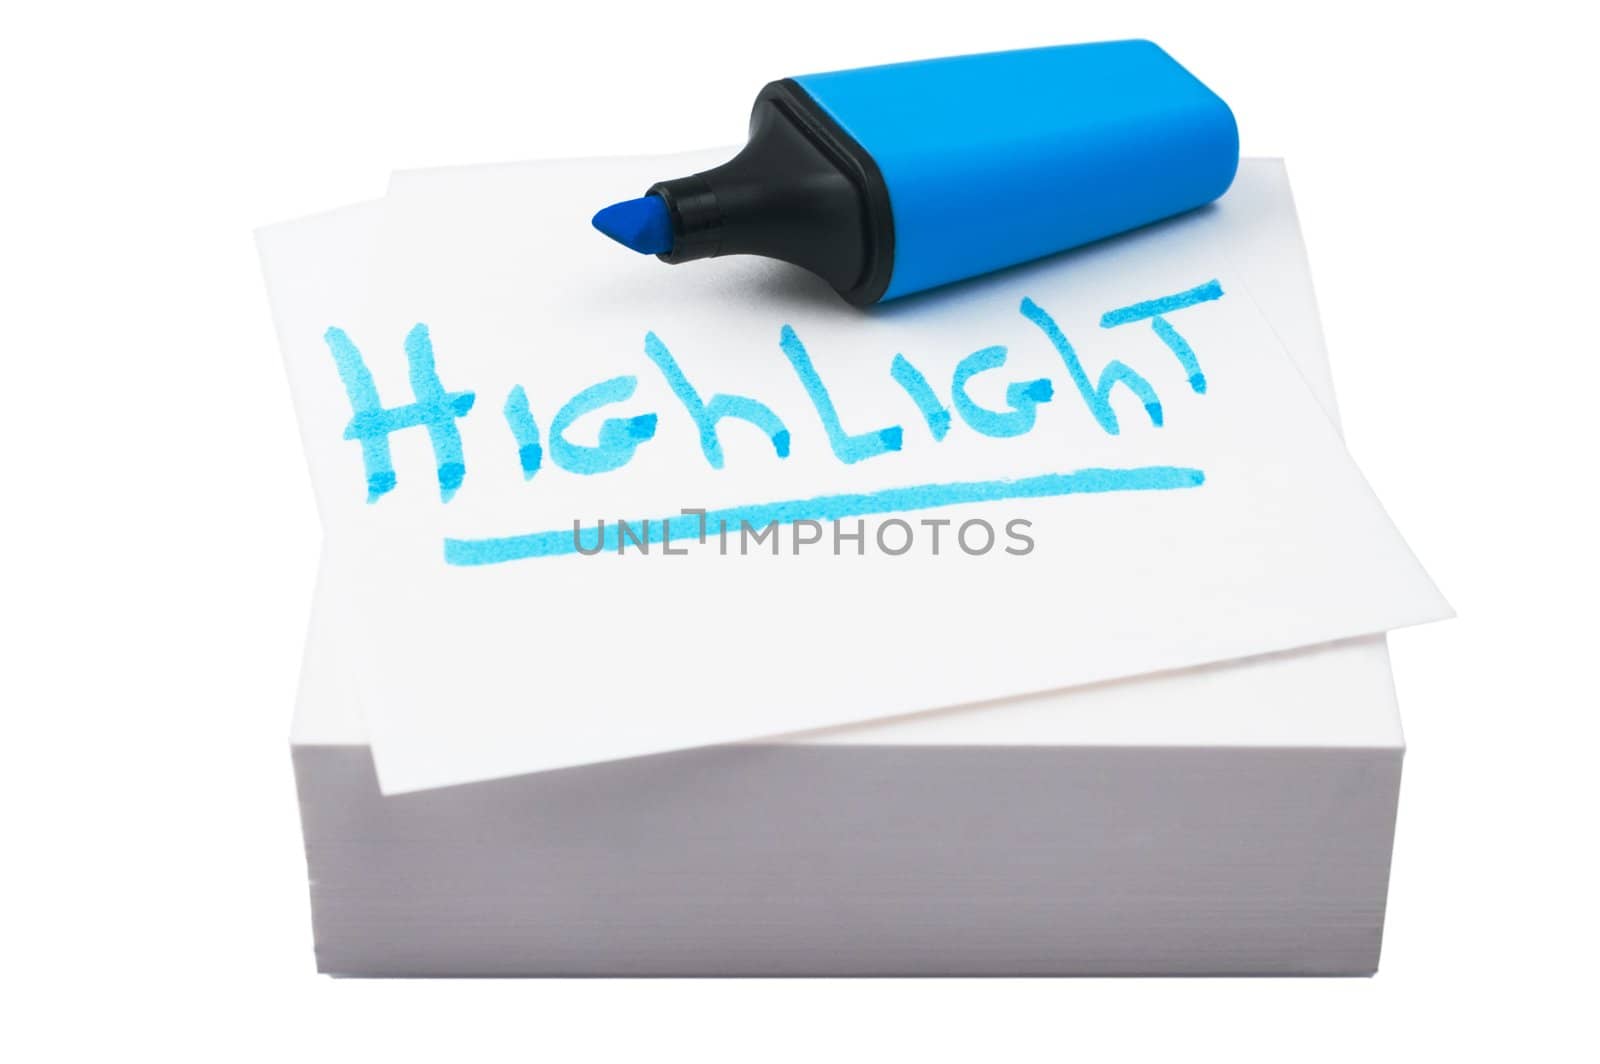 Blue highlighter on a stack of post-it notes with word 'highlight' - isolated on white